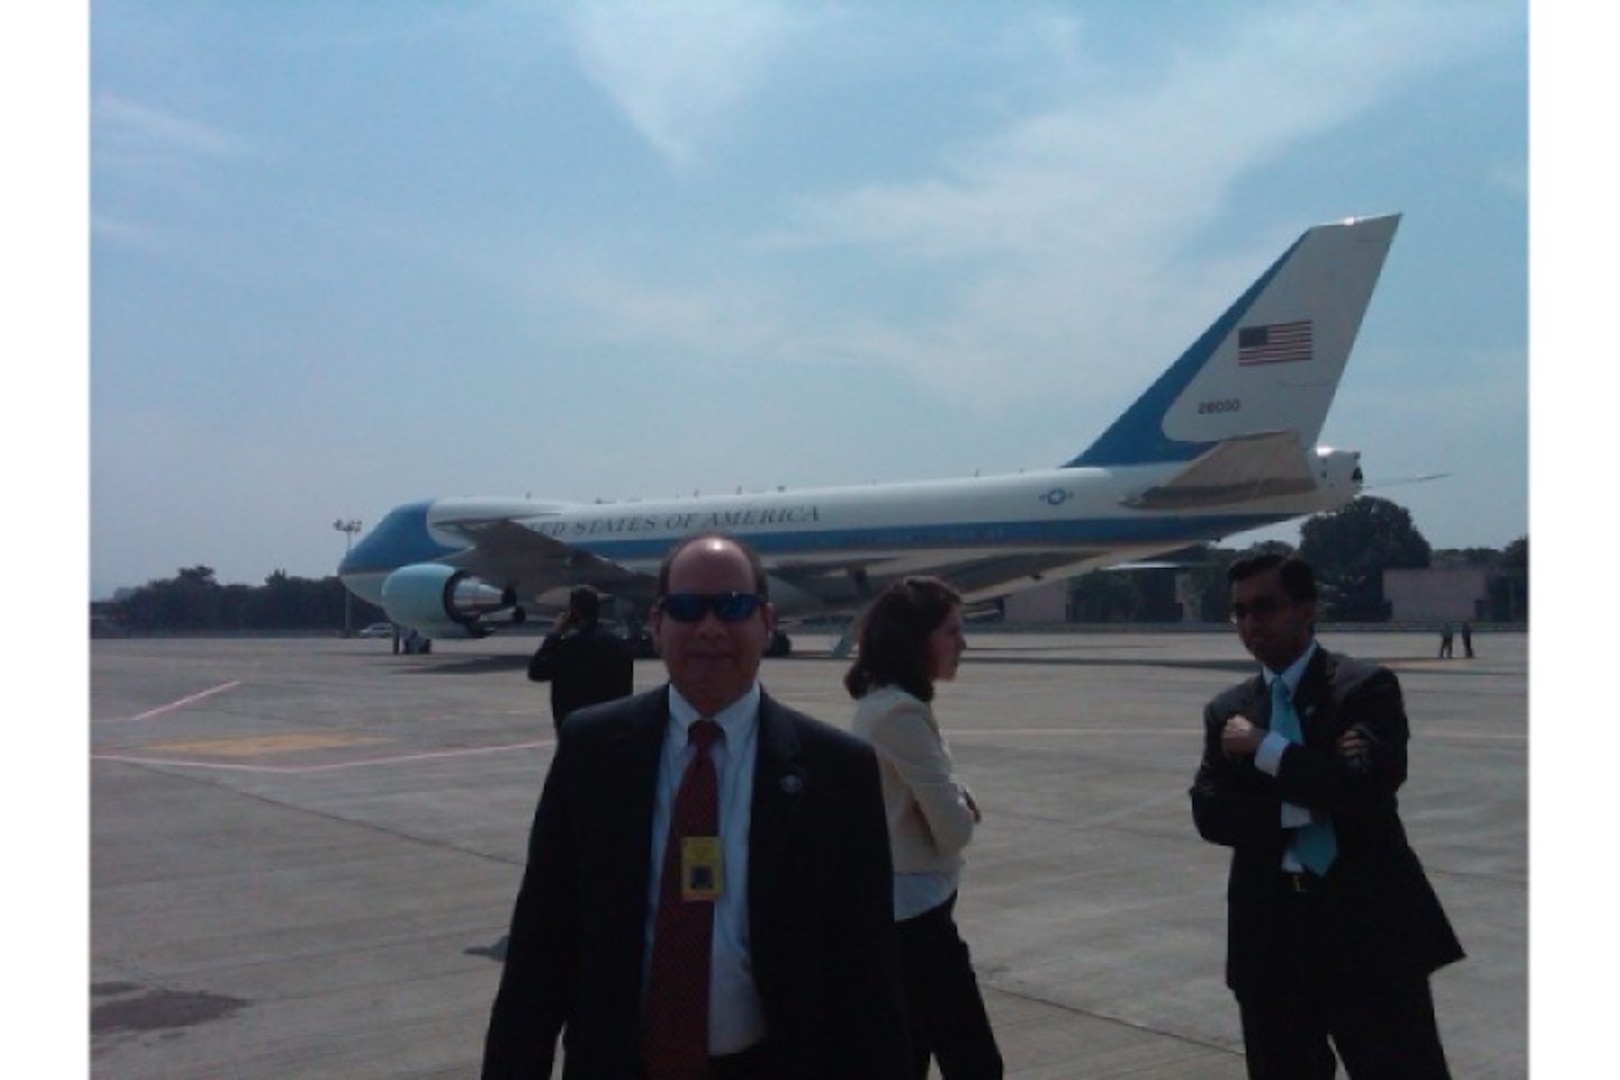 Danoy stands in front of Air Force One during a trip to Mumbai, India.